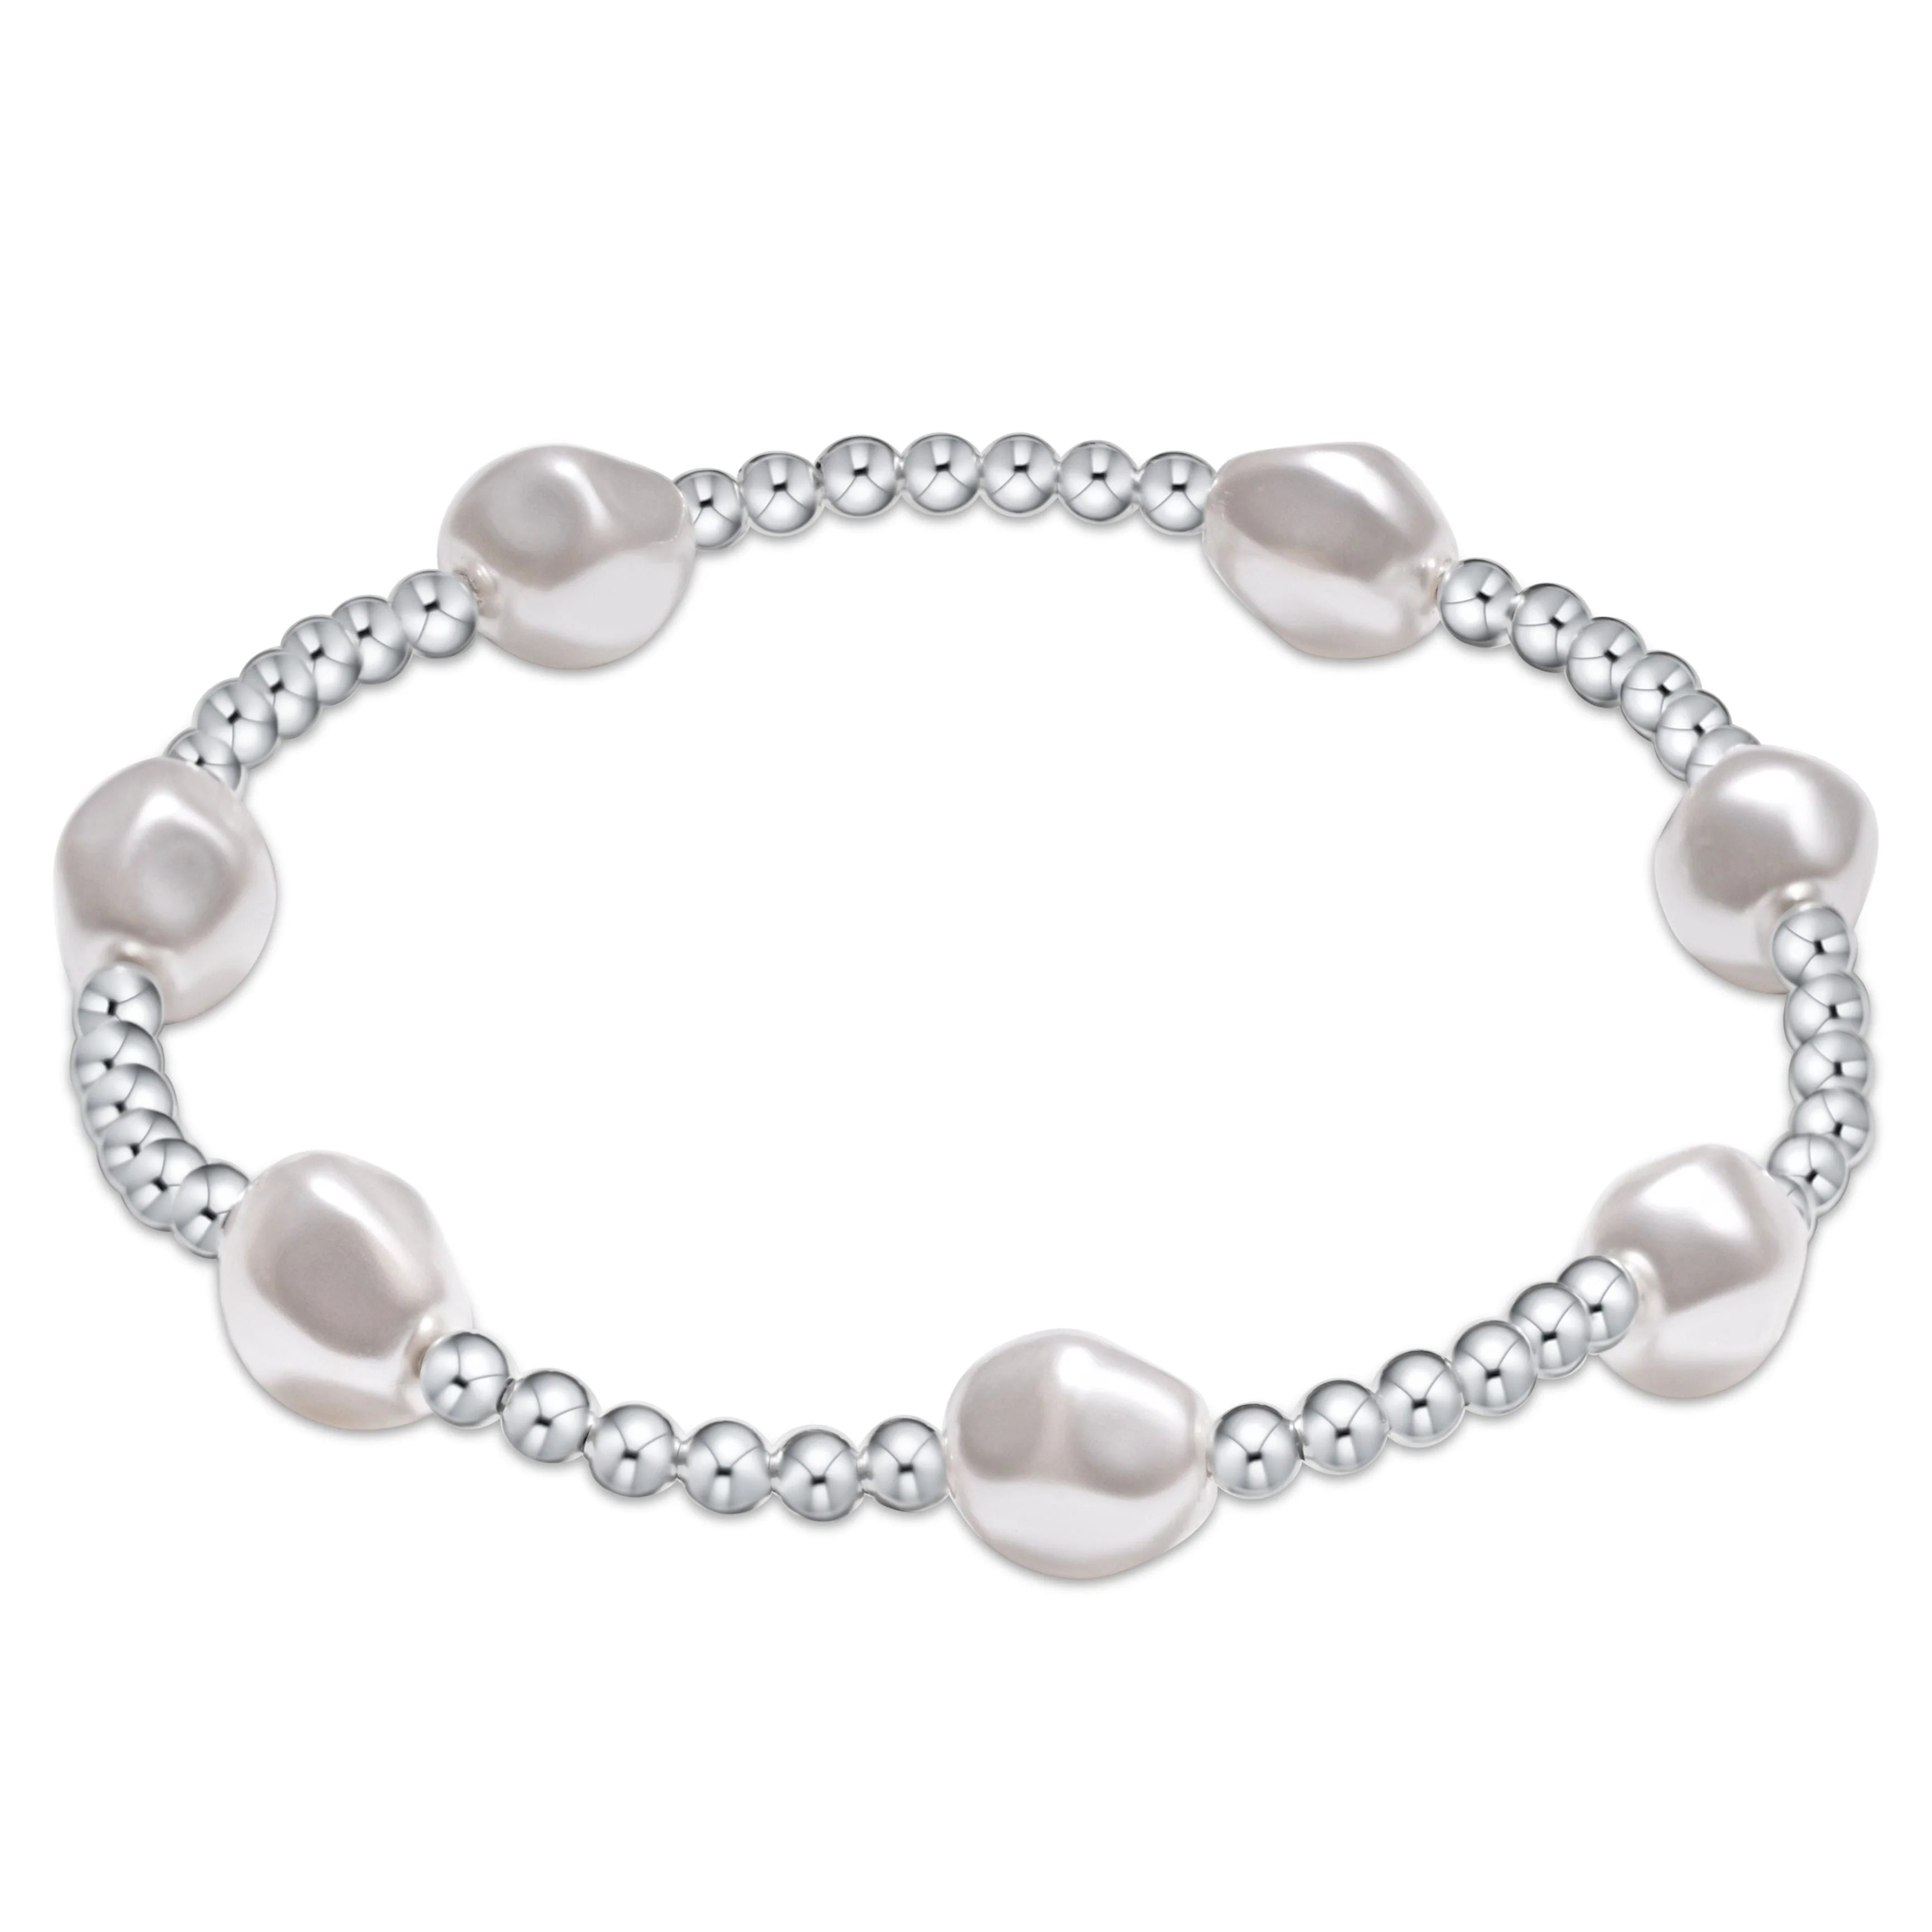 Silver Beaded and Pearl Accent Bracelet